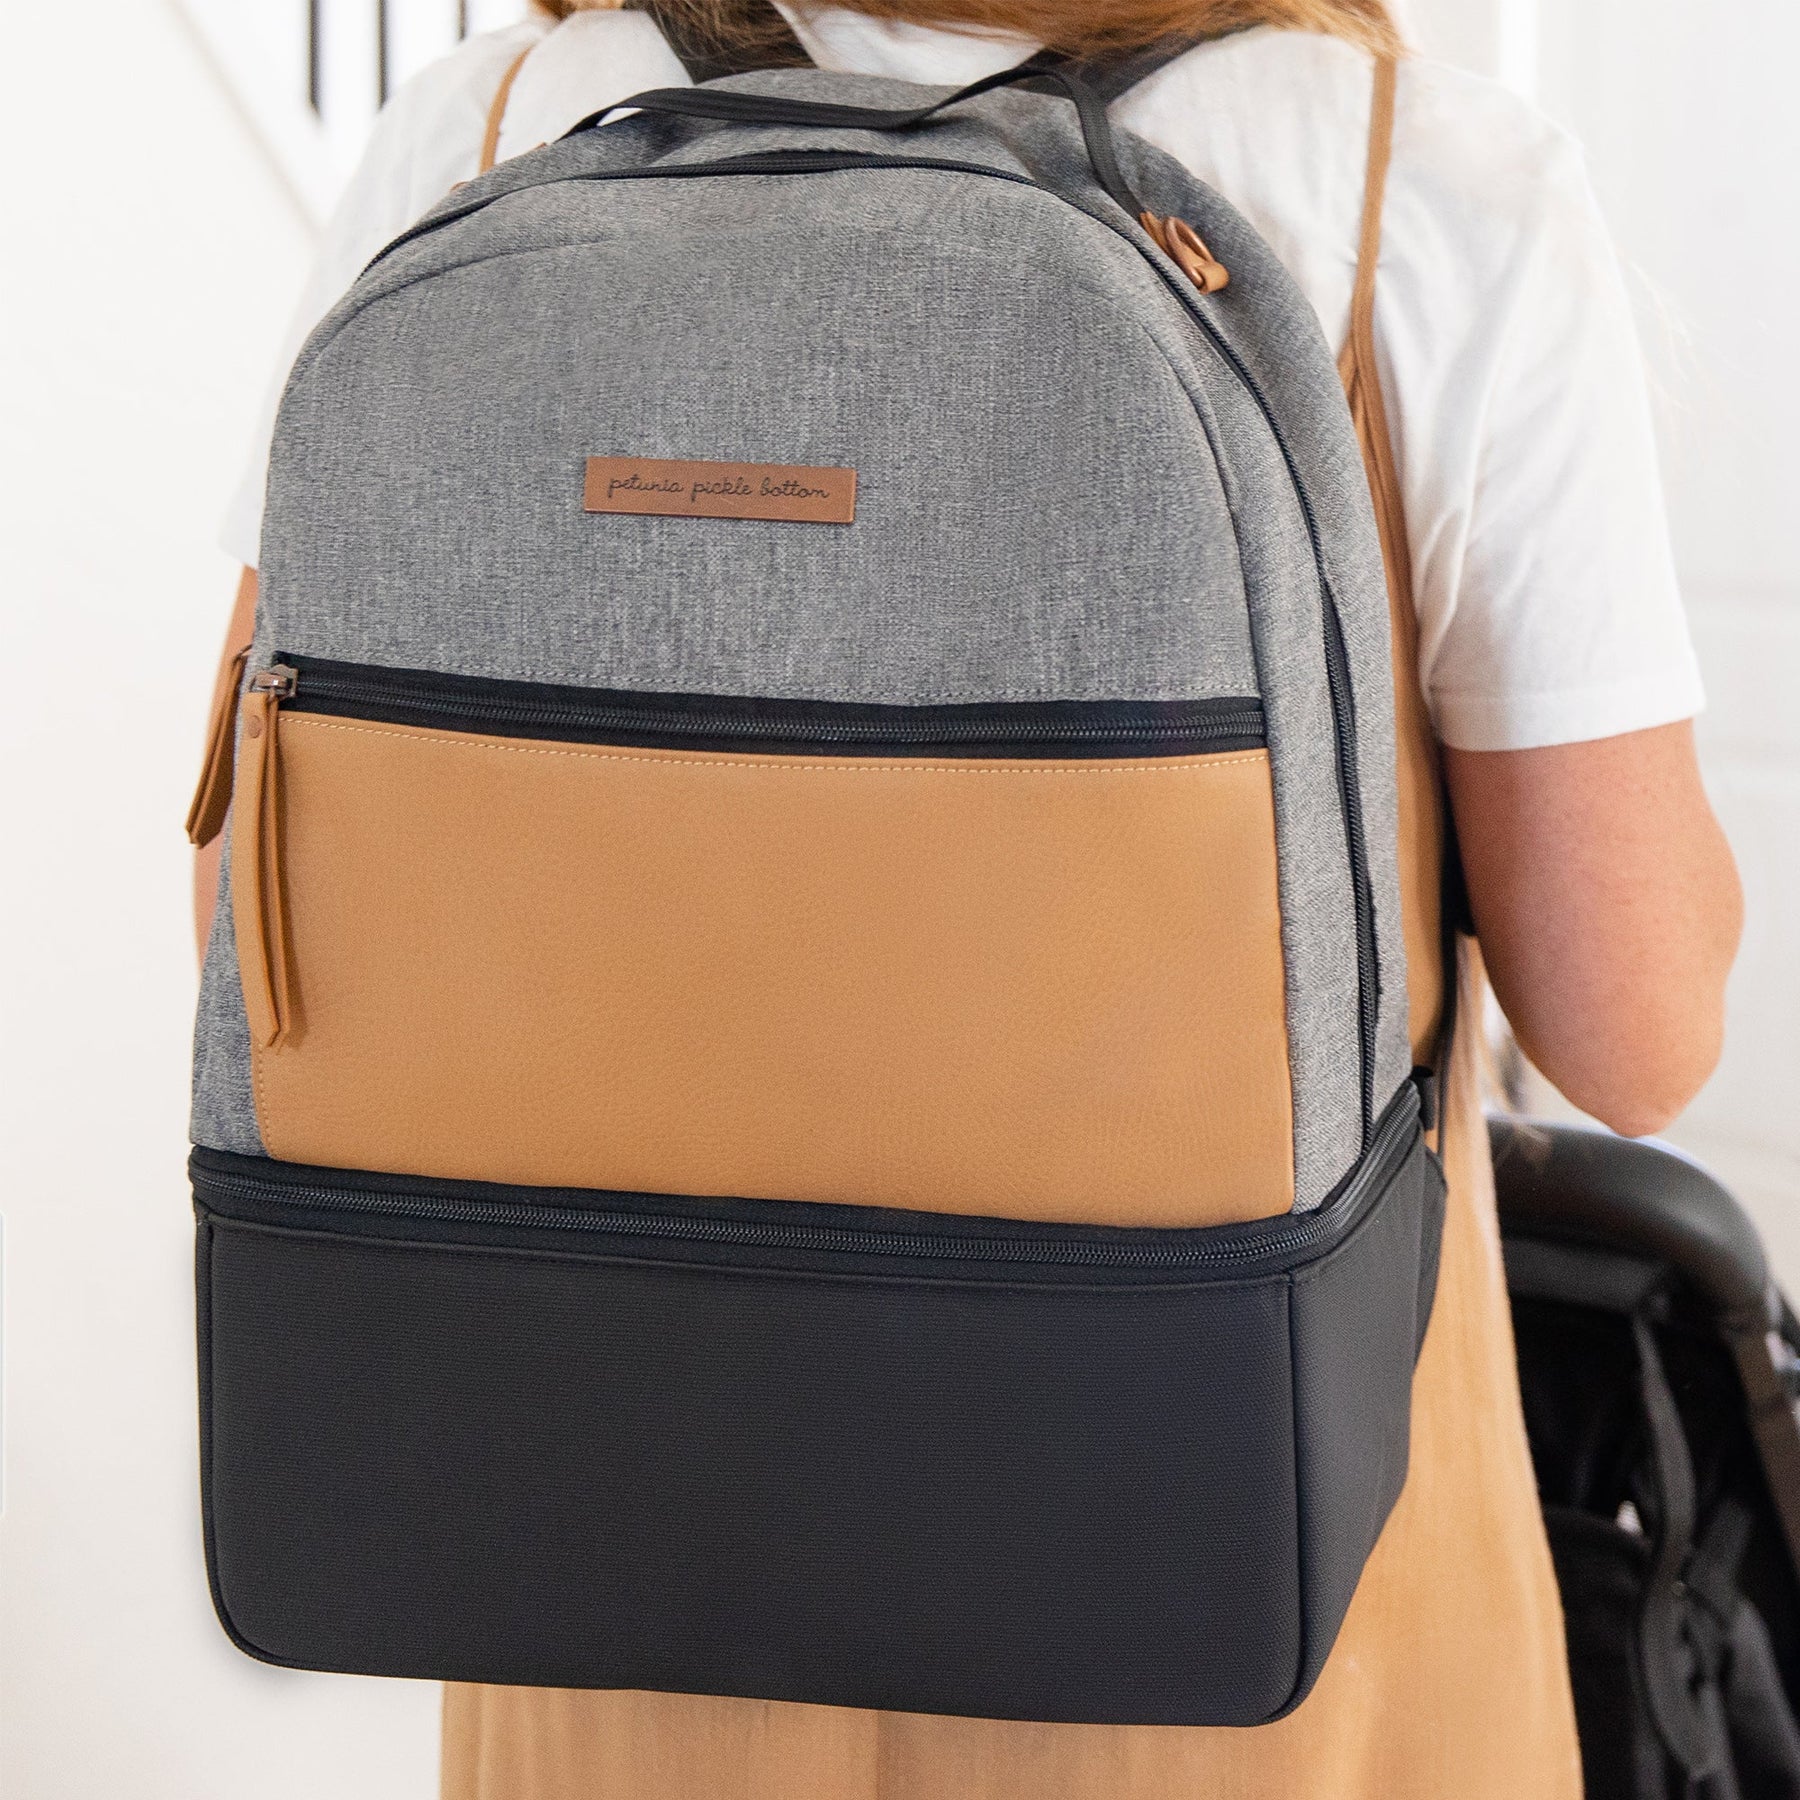 graphite canvas backpack price